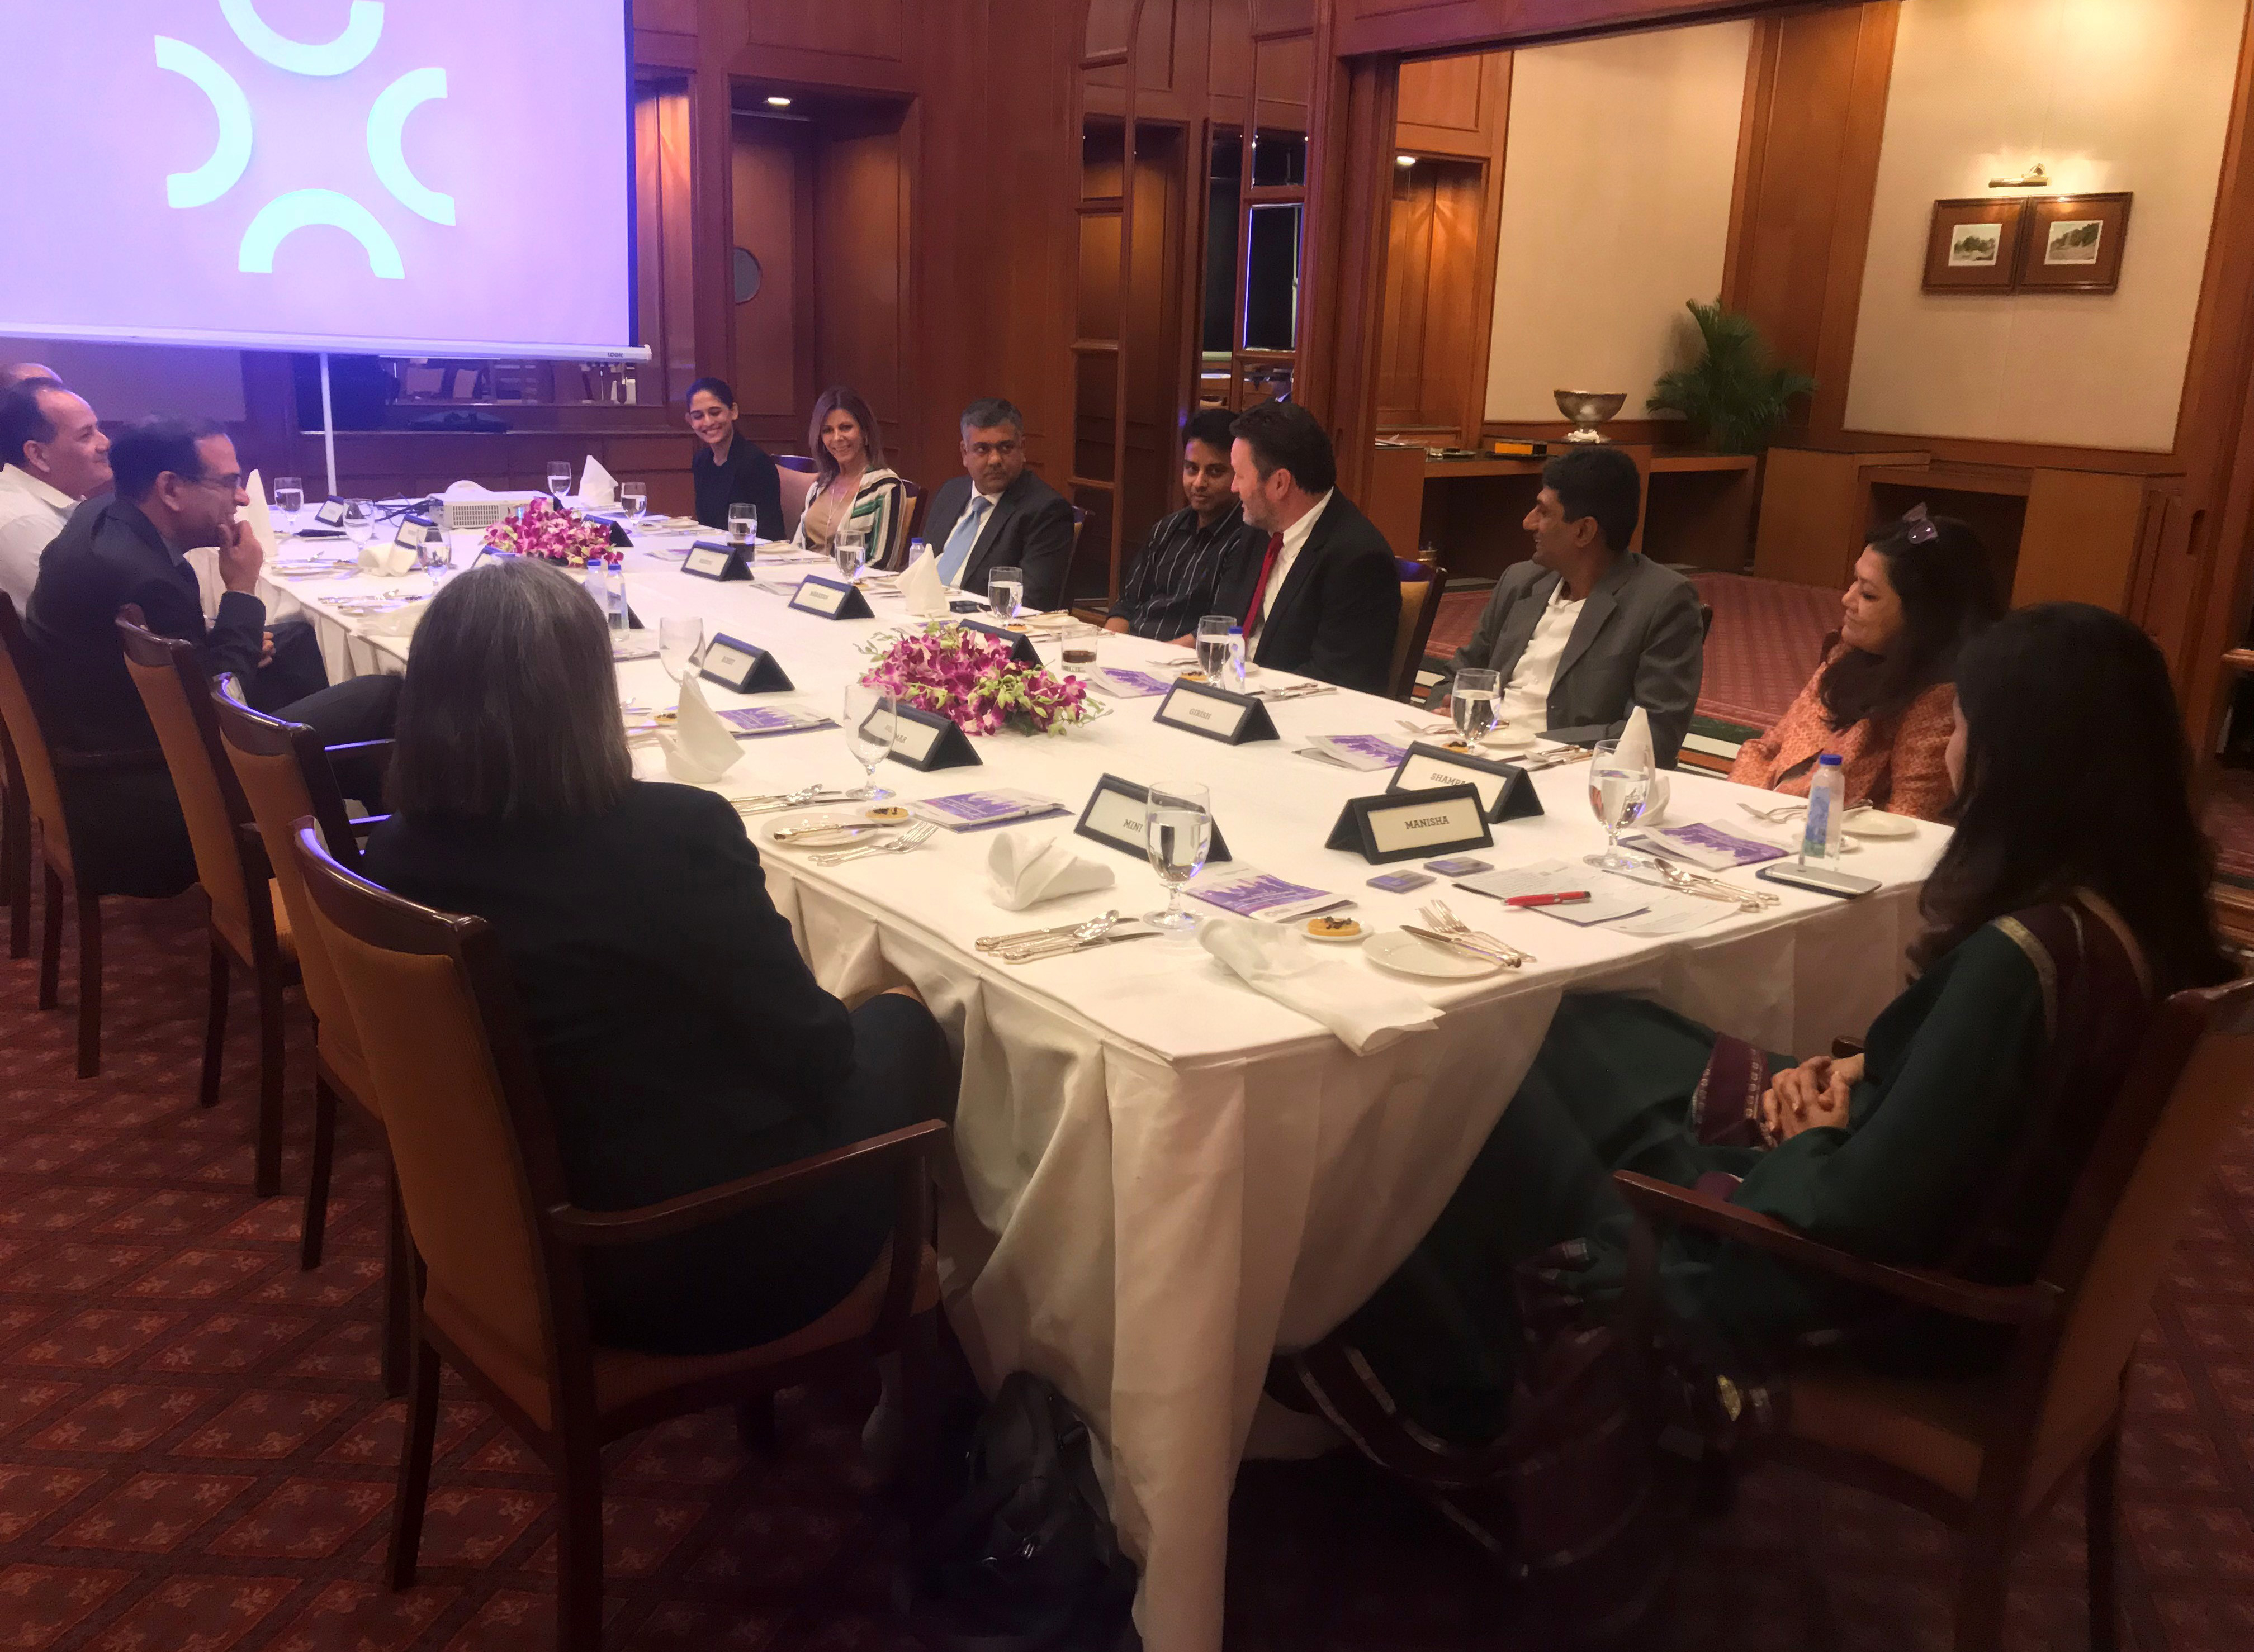 Kingsley Gate Partners Hosts “Galaxy Of Leaders” Conference-2018 In Bengaluru